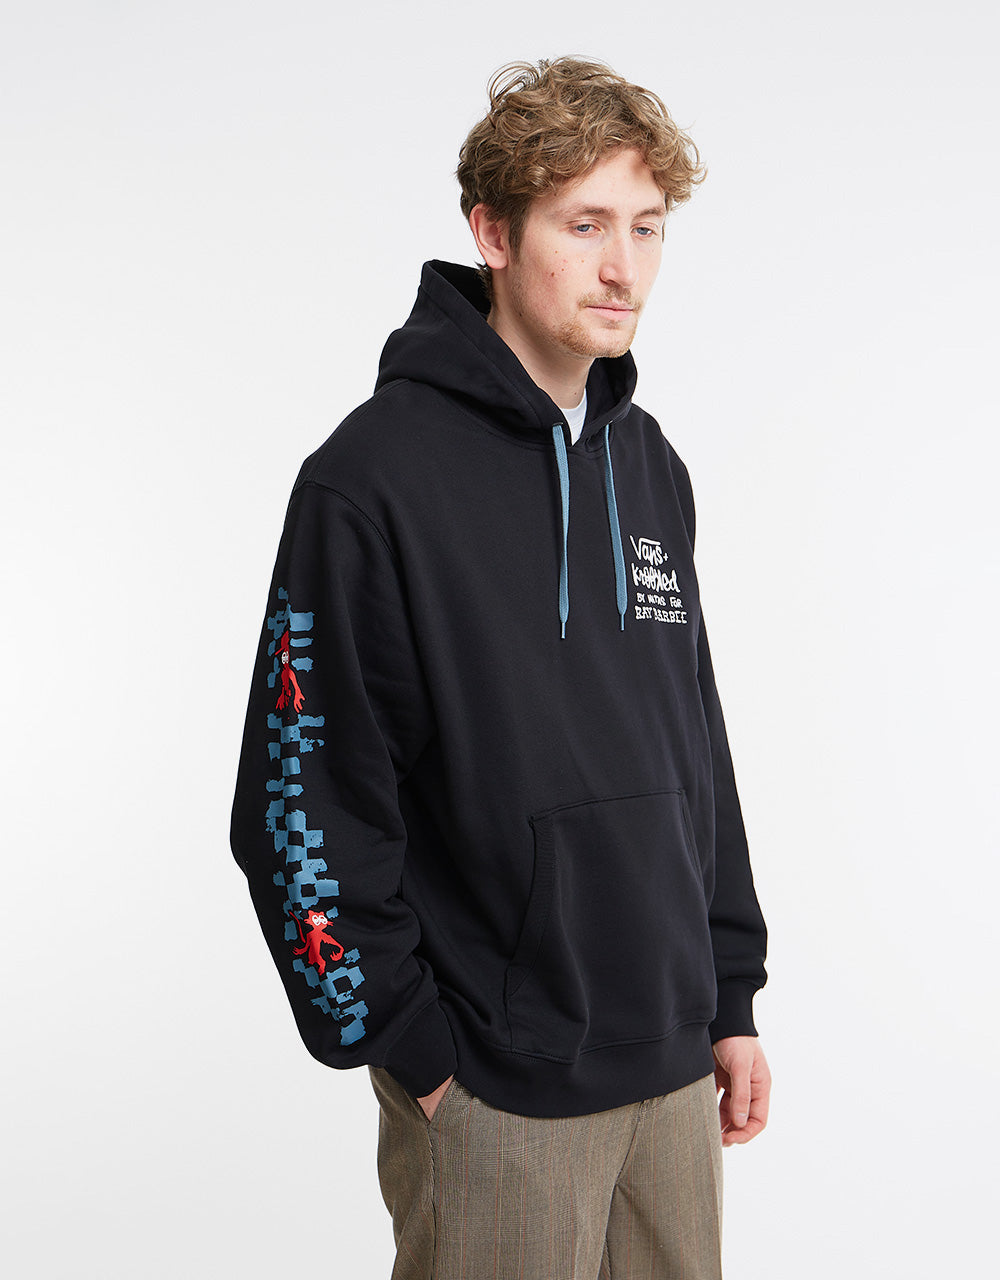 Vans x Krooked by Natas for Ray Pullover Hoodie - Black